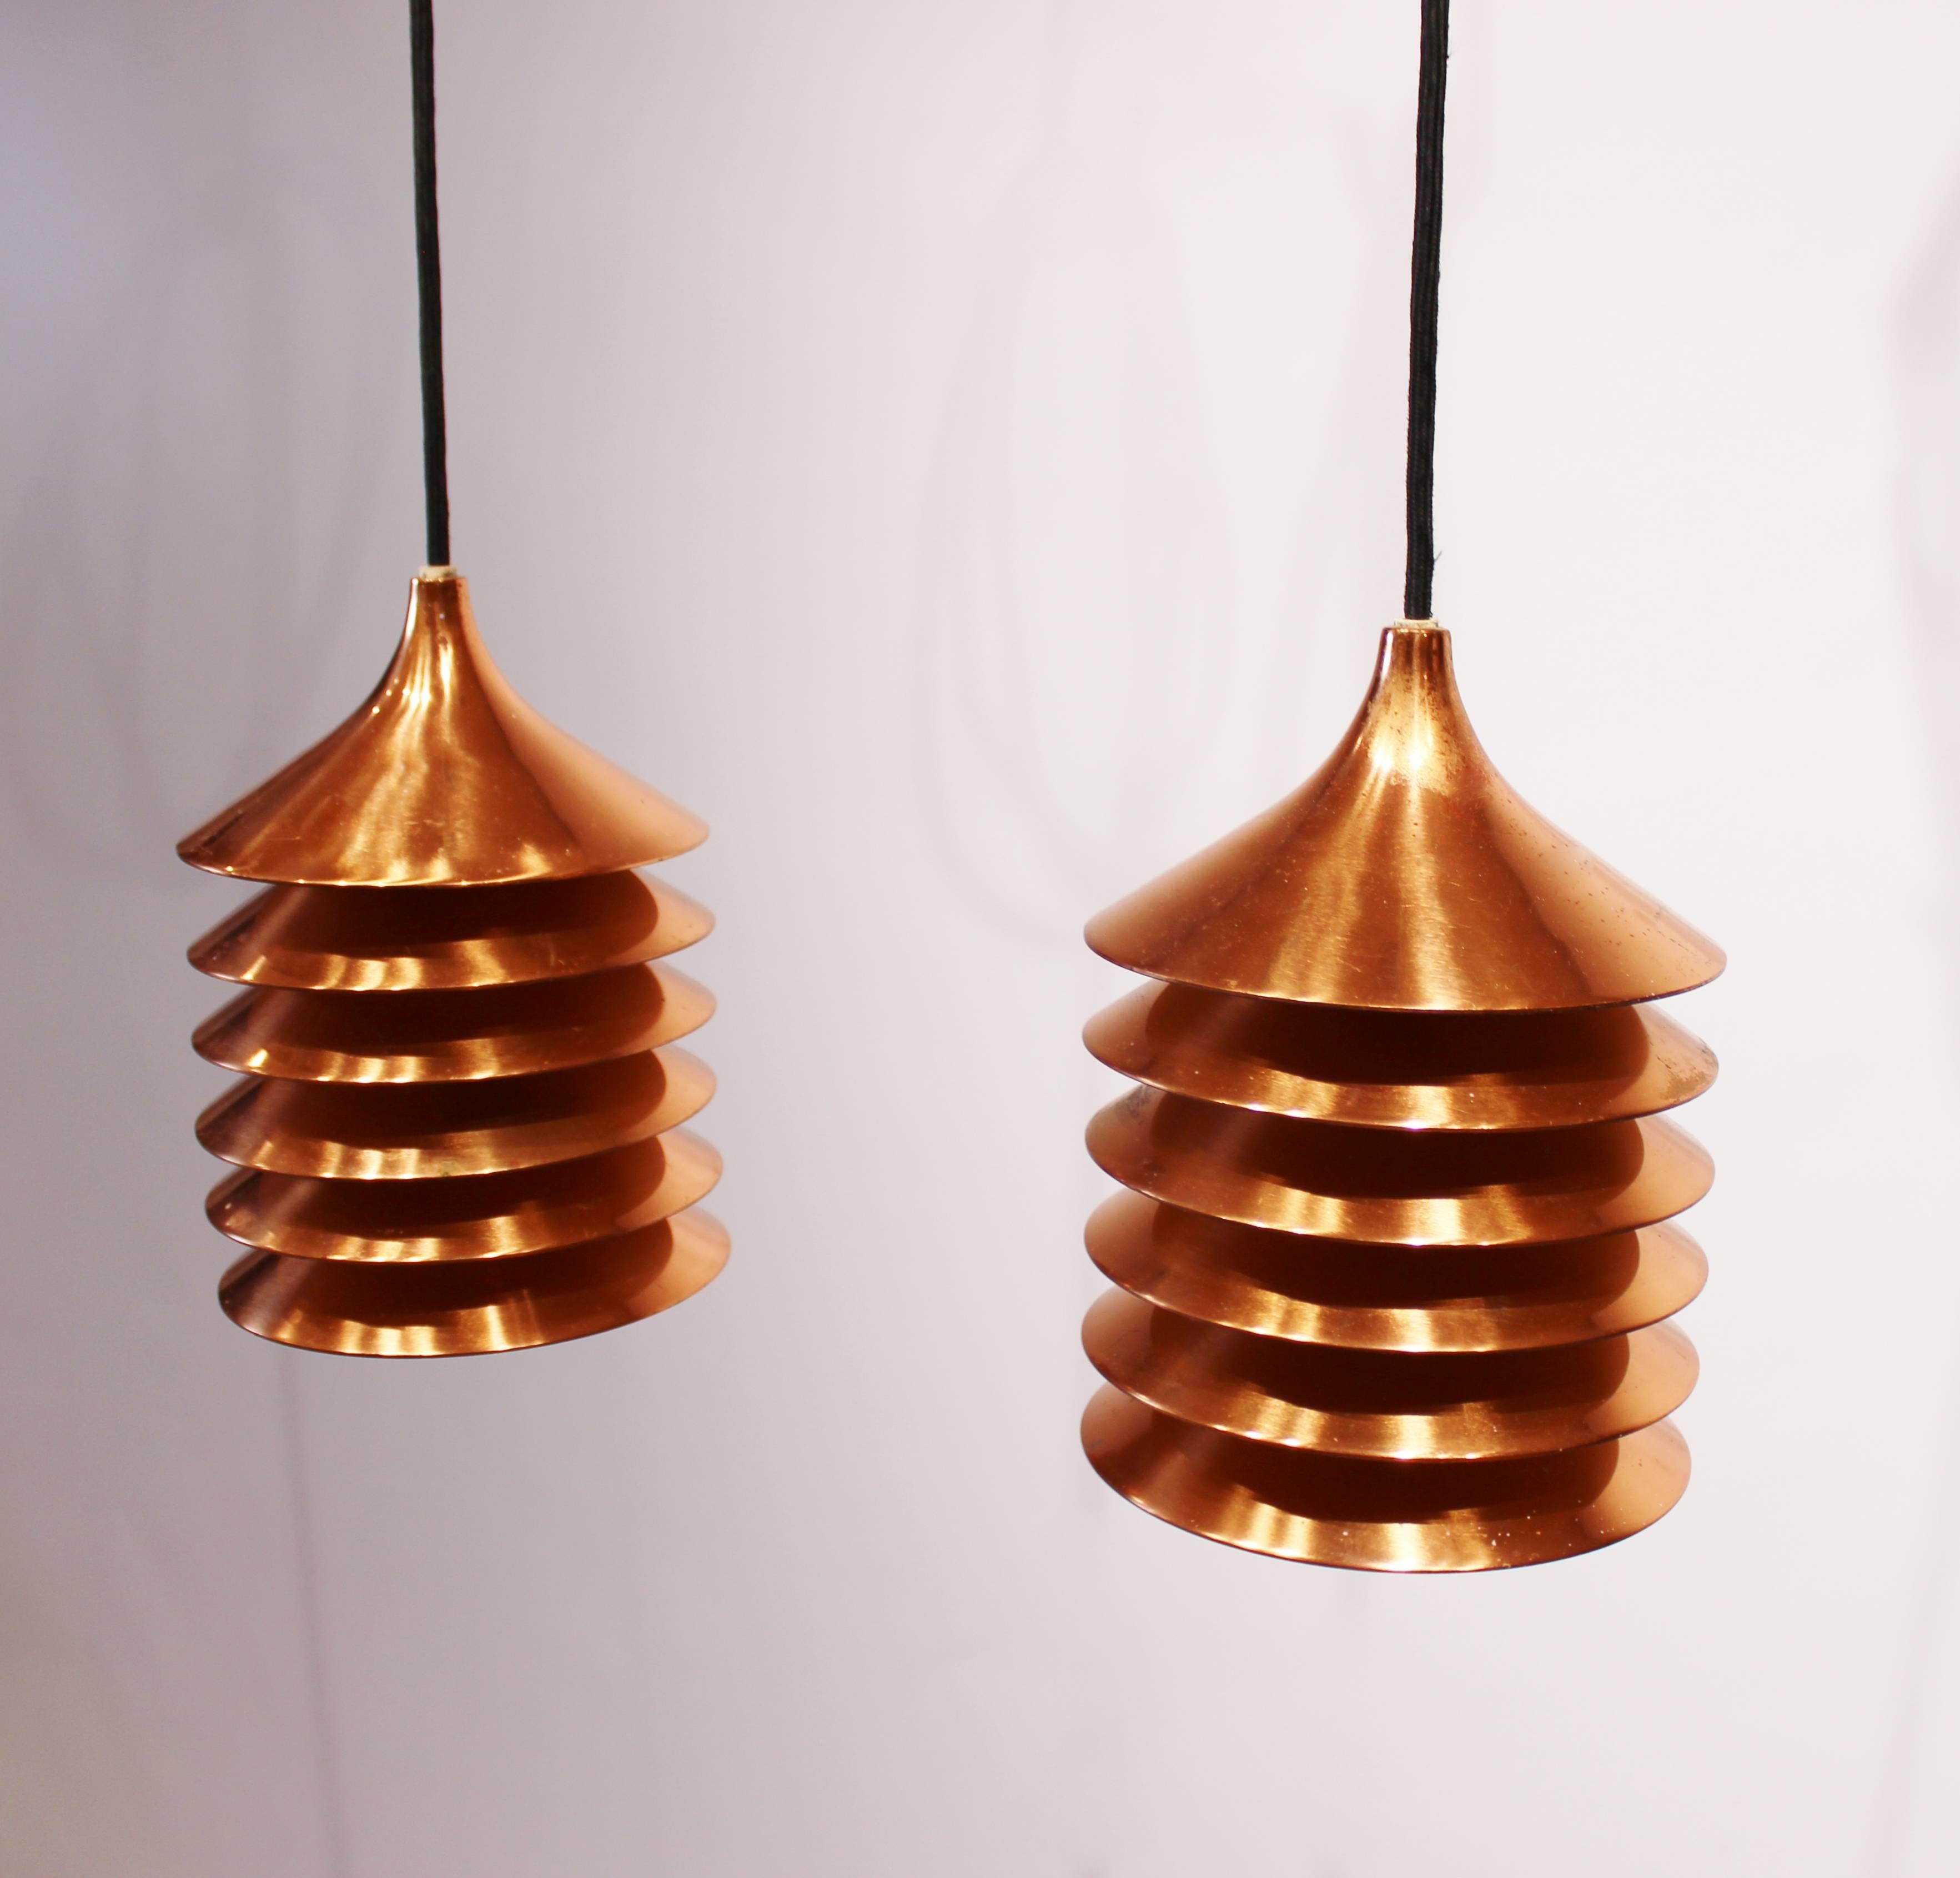 A pair of copper pendants of Danish design from the 1960s. The pendants are in great vintage condition with new black fabric cord.